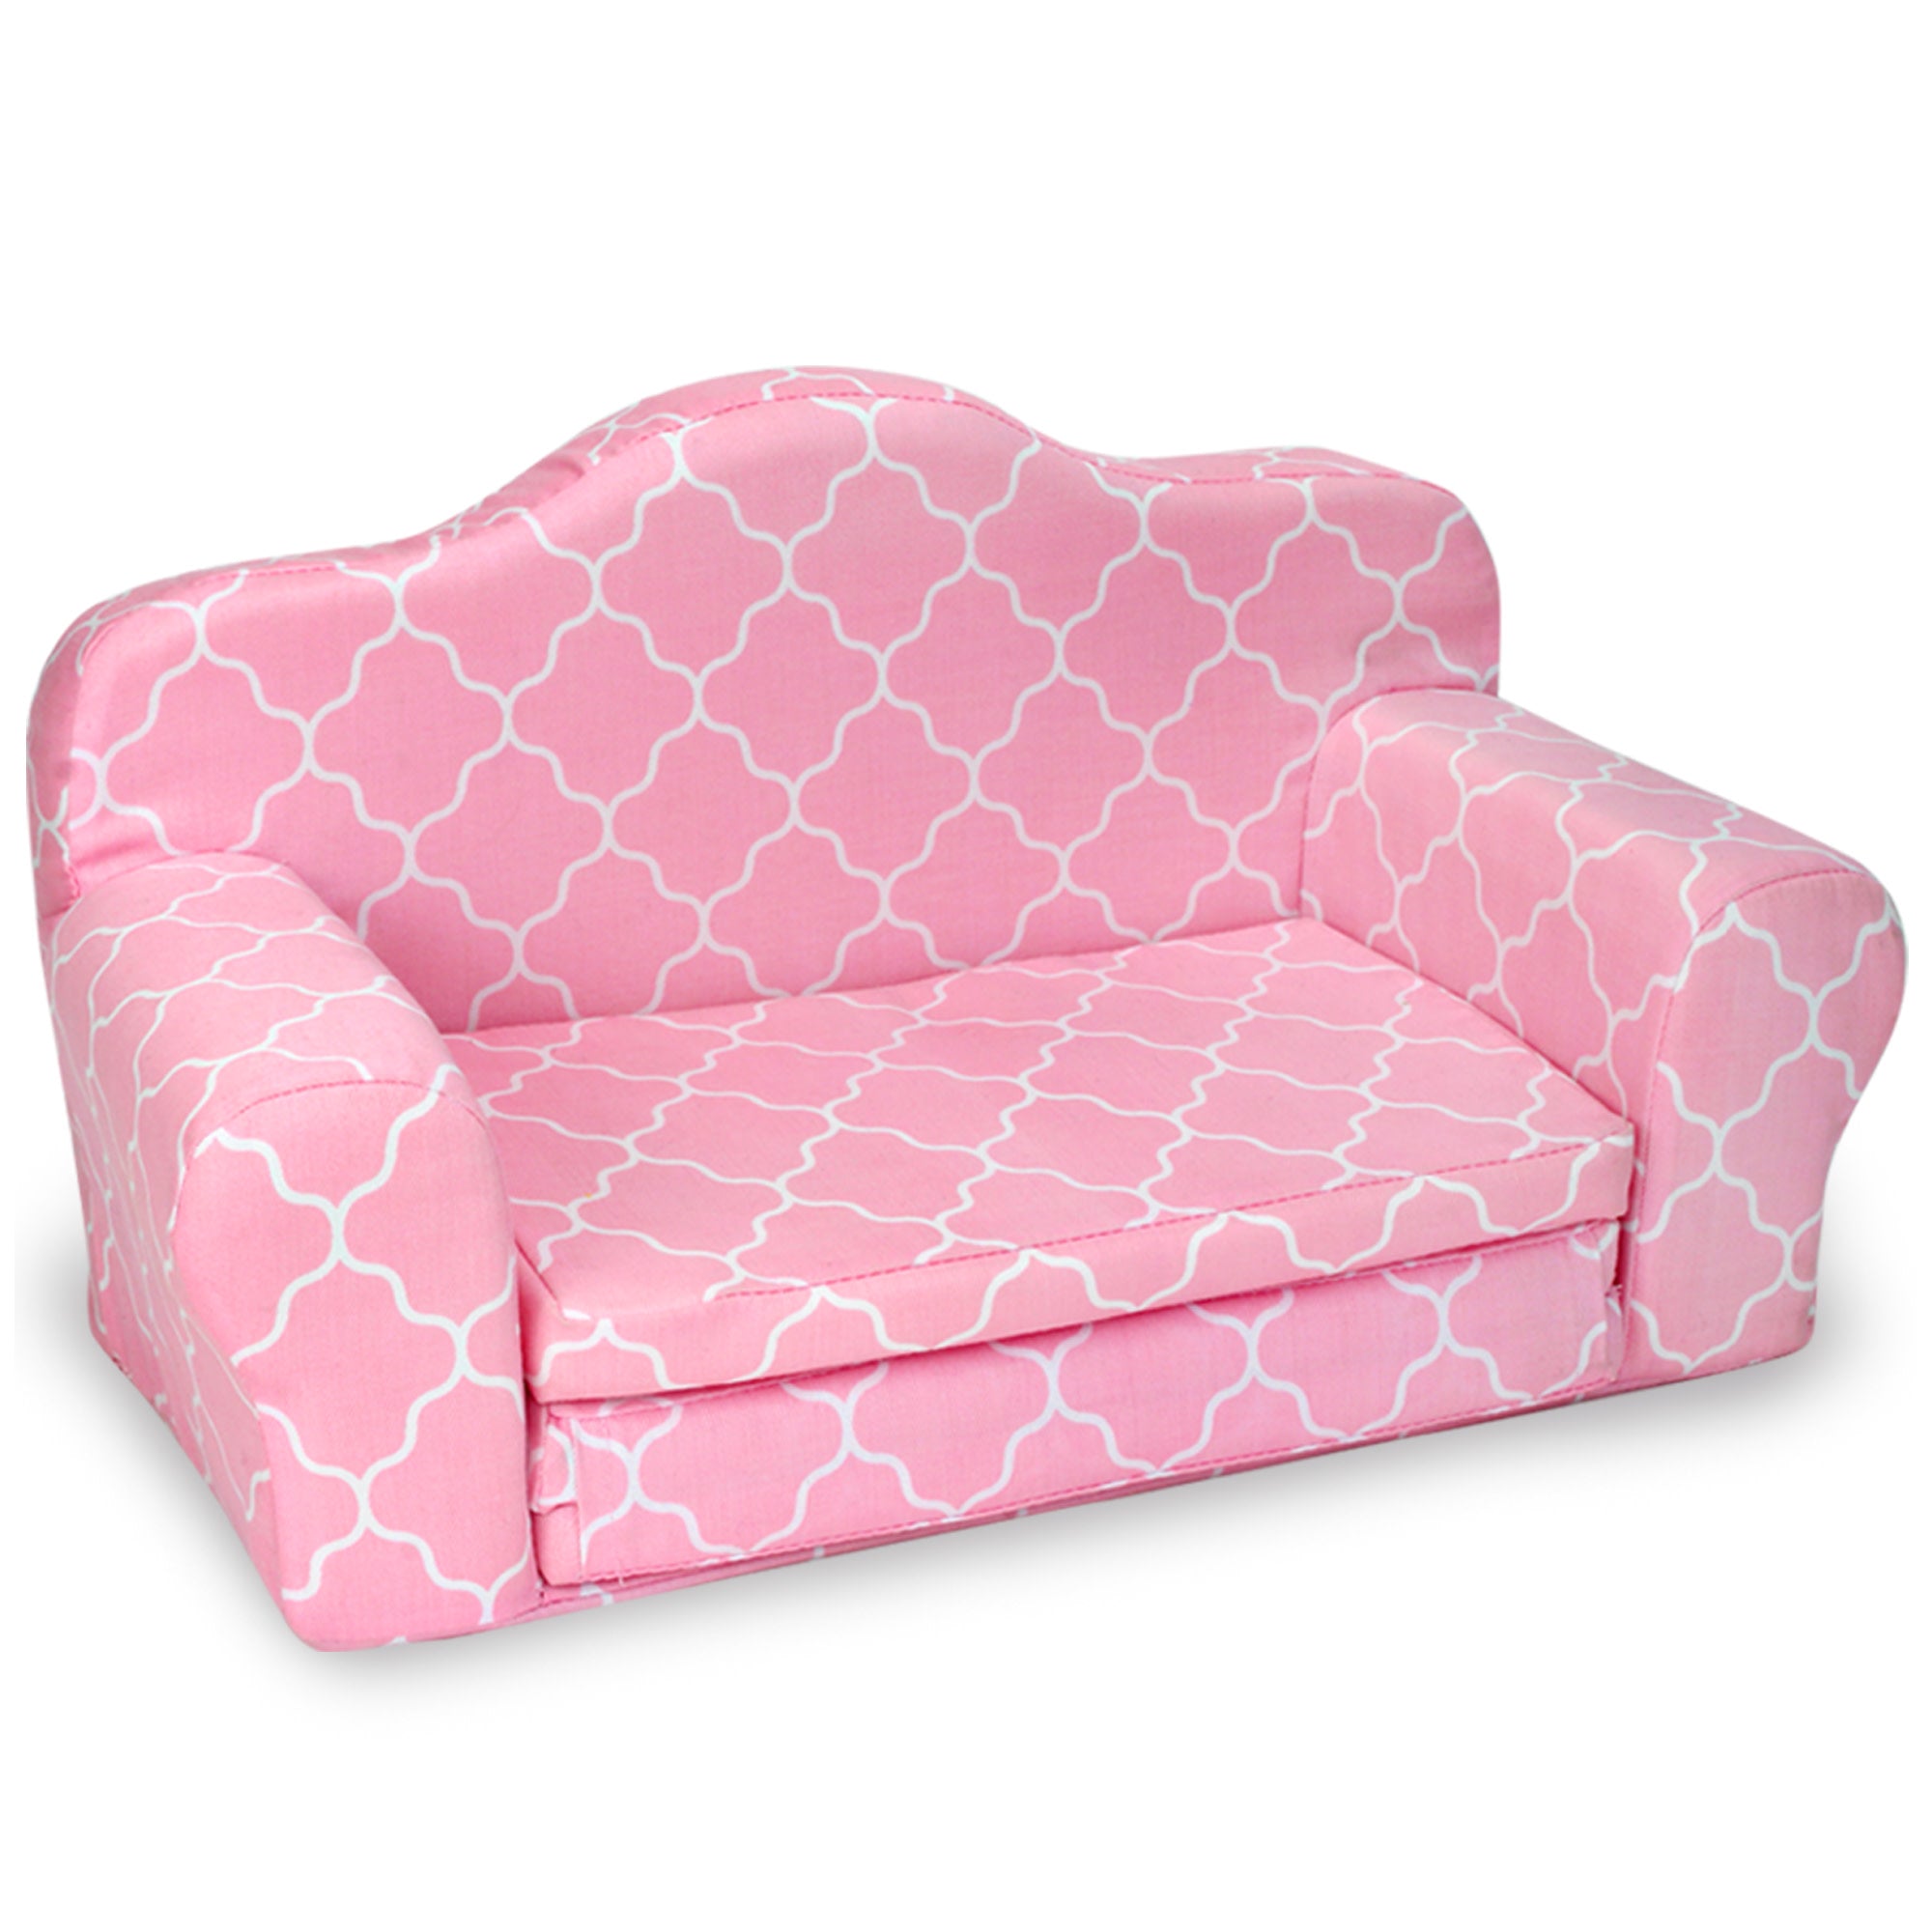 Sophia's 2-in-1 Plush Pull-Out Sofa Bed for Two 18'' Dolls, Pink